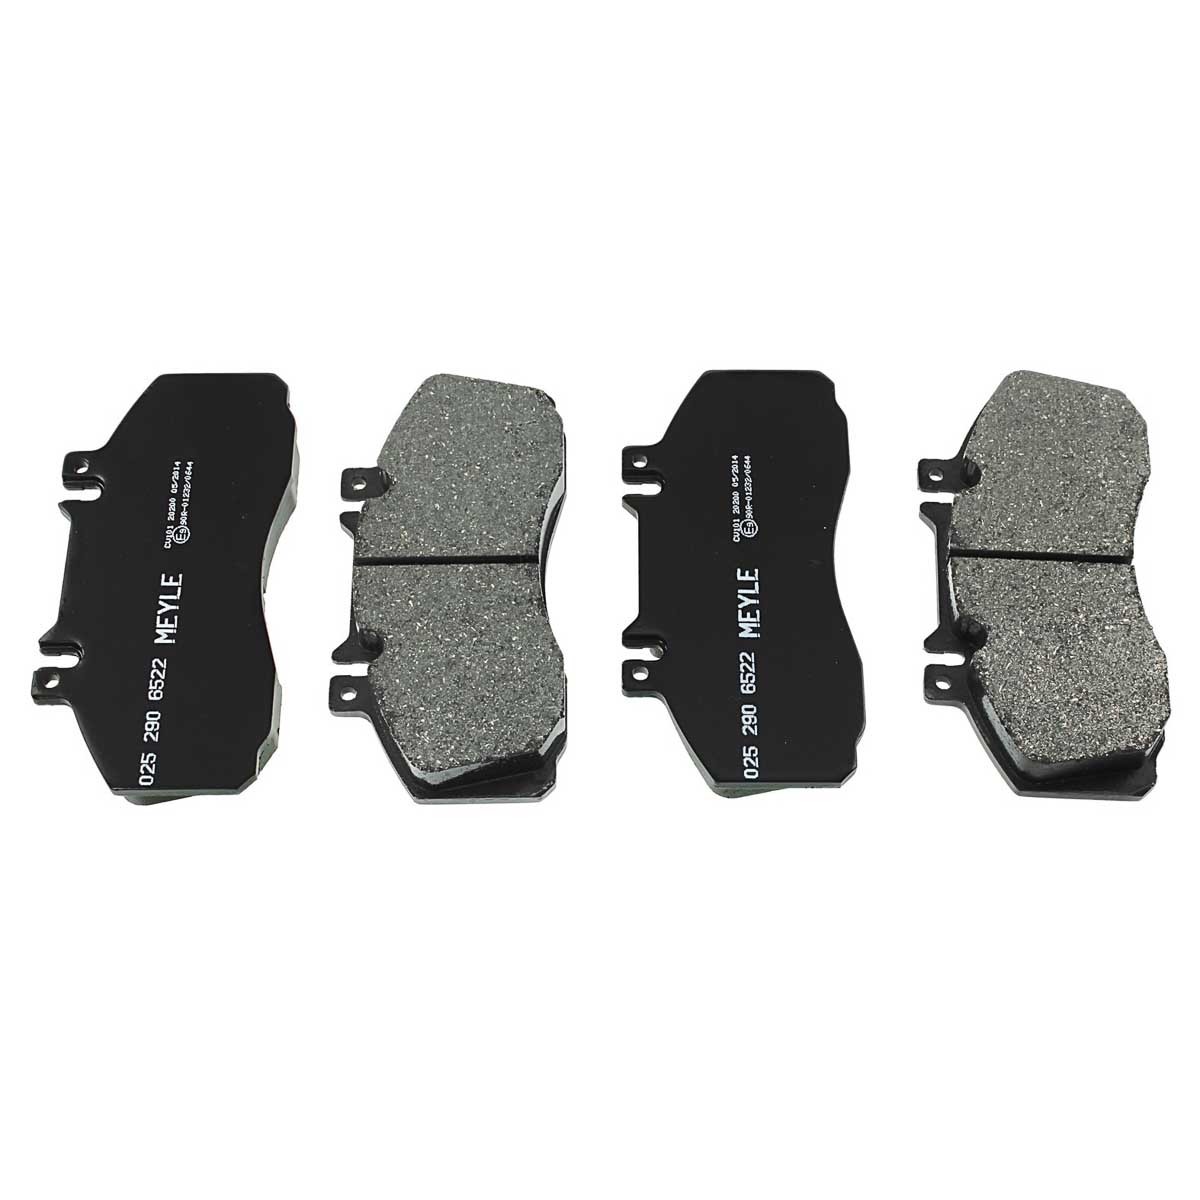 MEYLE 025 290 6522 Brake pad set ORIGINAL Quality, Front Axle, excl. wear warning contact, prepared for wear indicator, without attachment material